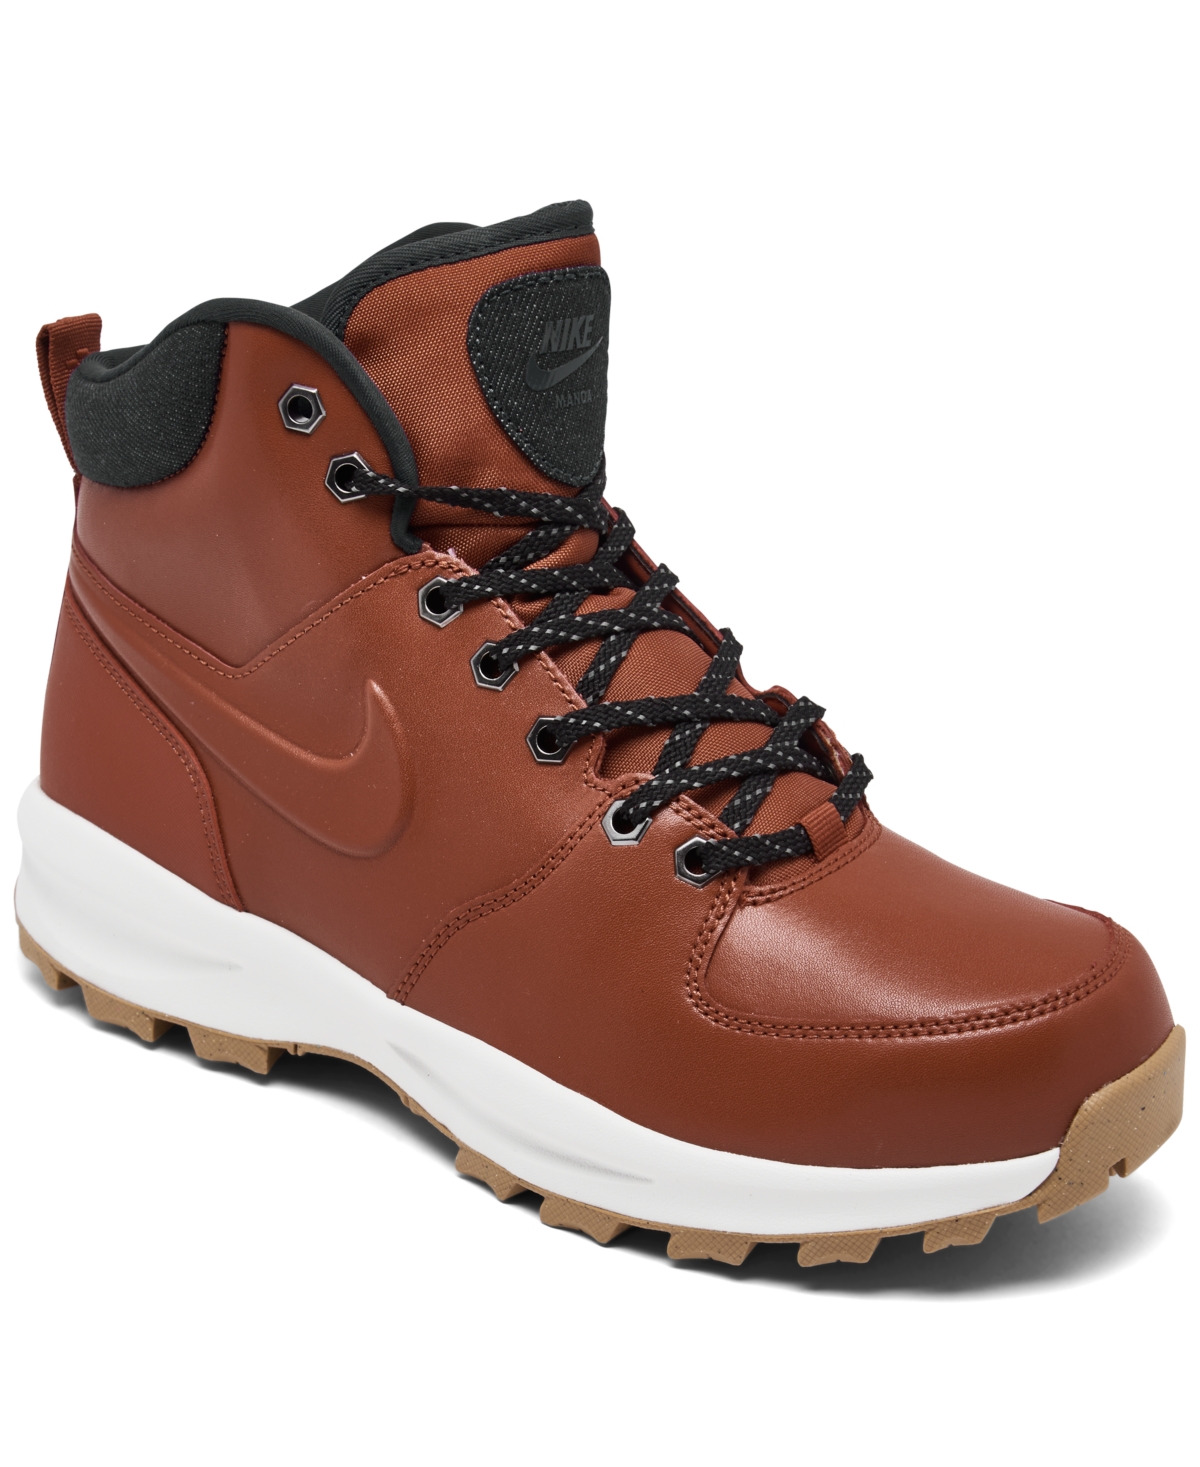 industria Cerdito Oficial Nike Men's Manoa Leather Se Boots from Finish Line - Macy's